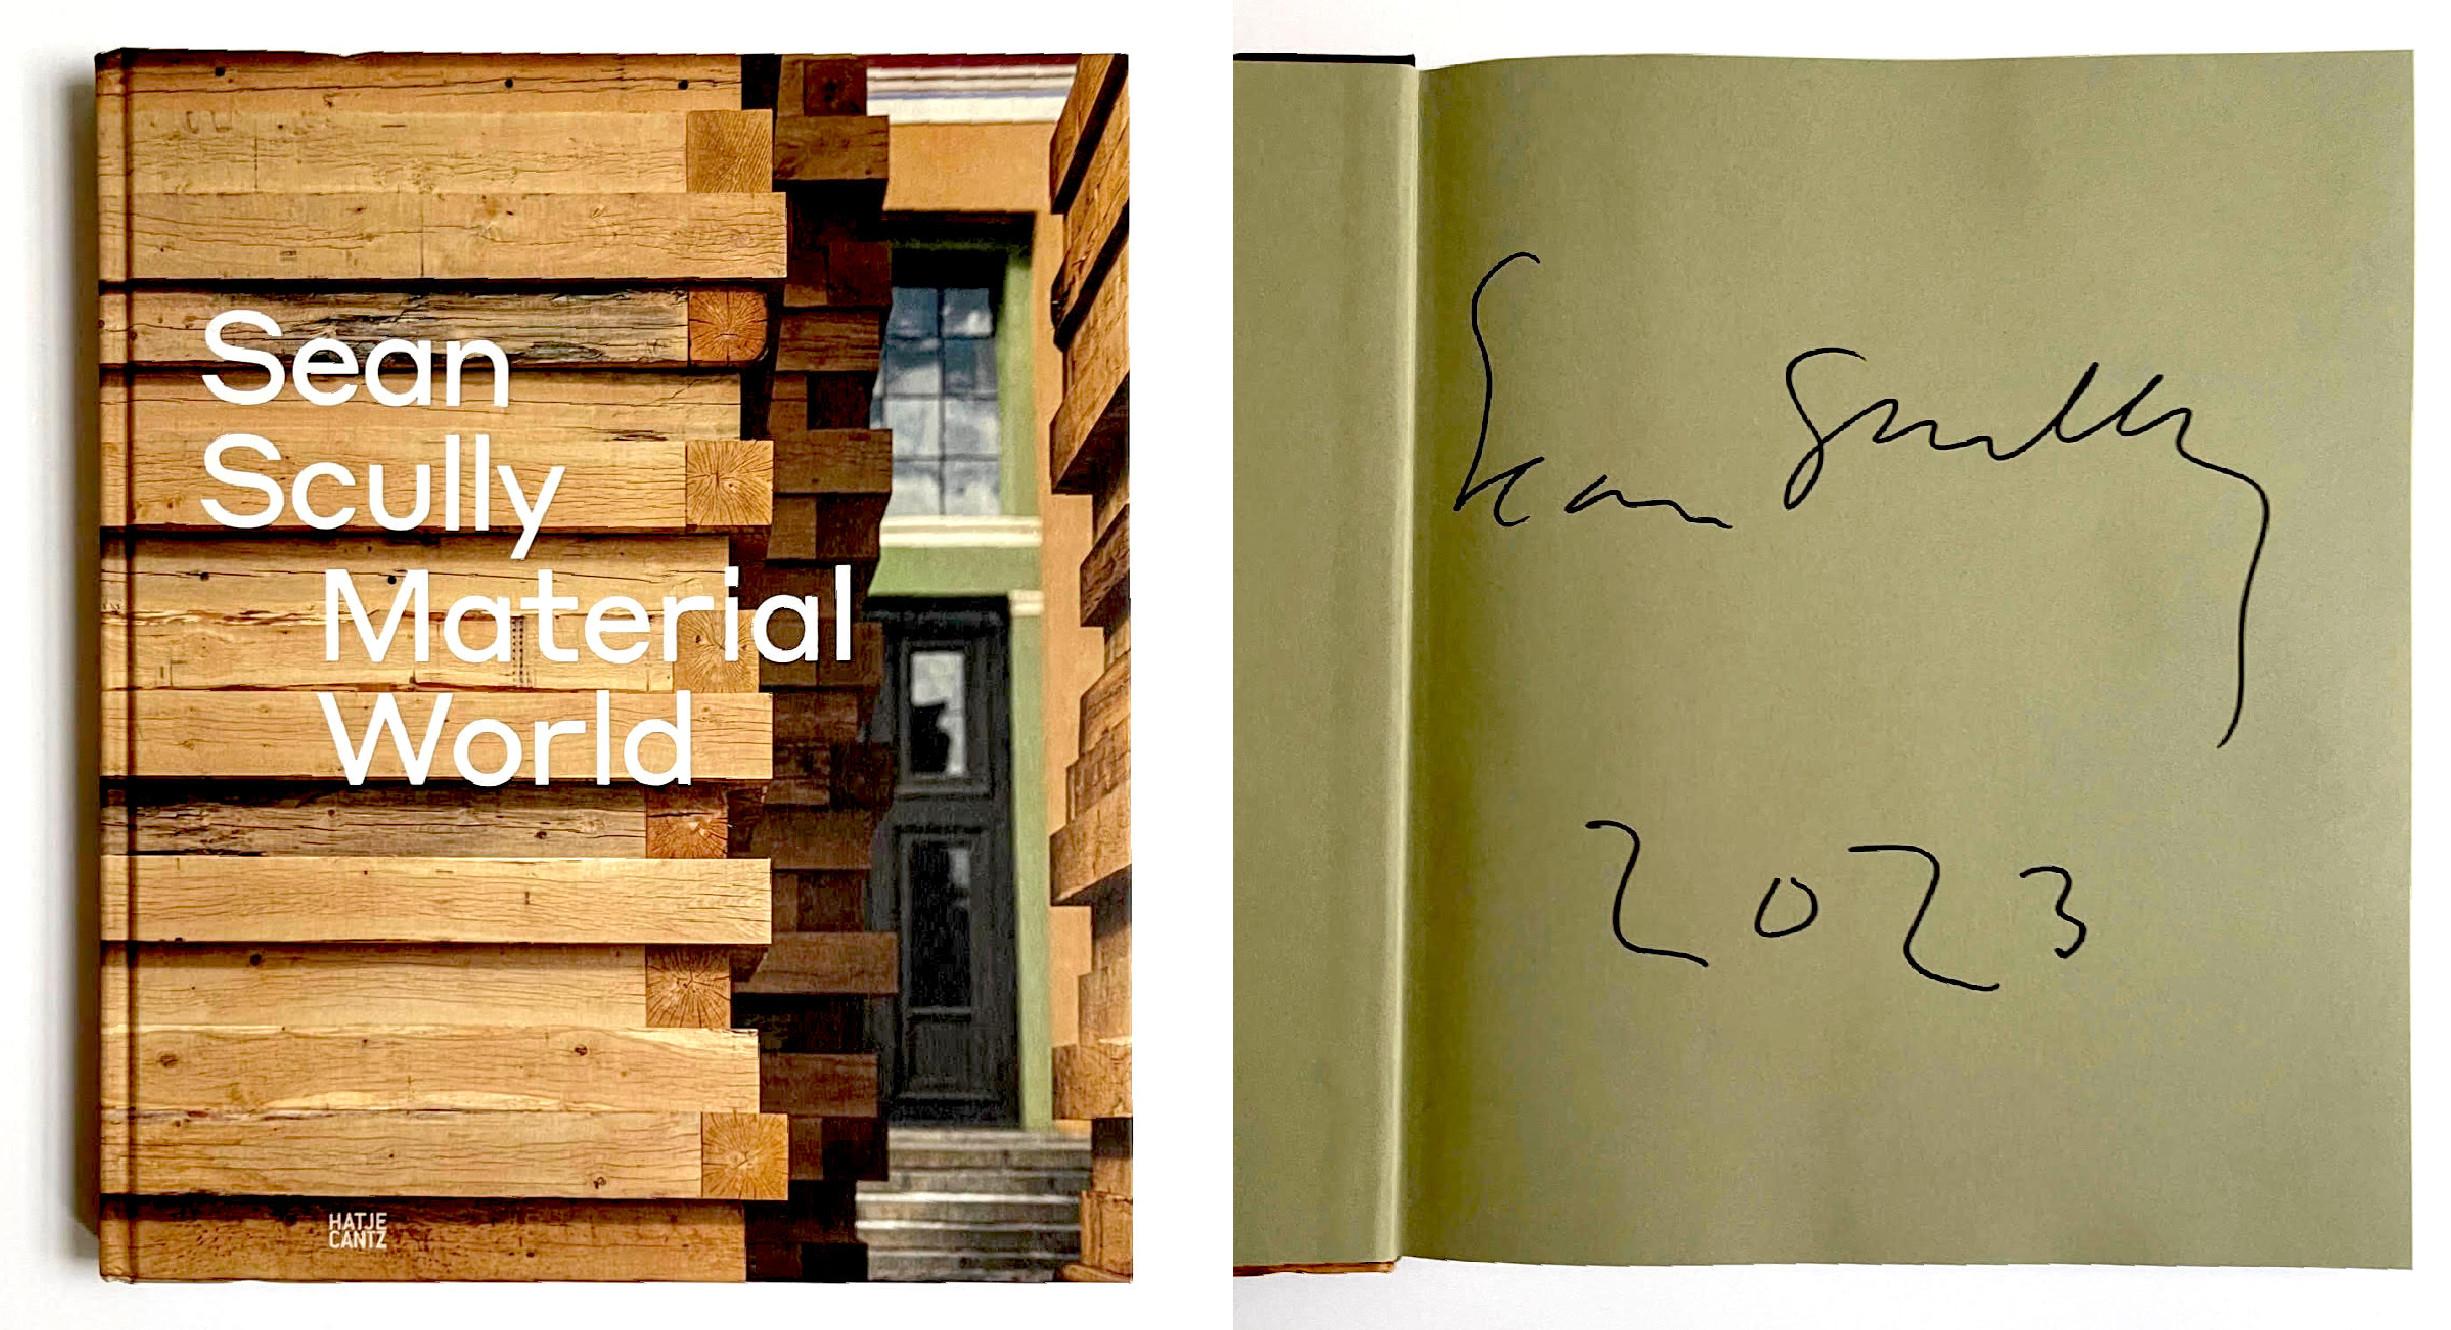 Sean Scully: Material World (Monograph Hand signed and dated by Sean Scully)